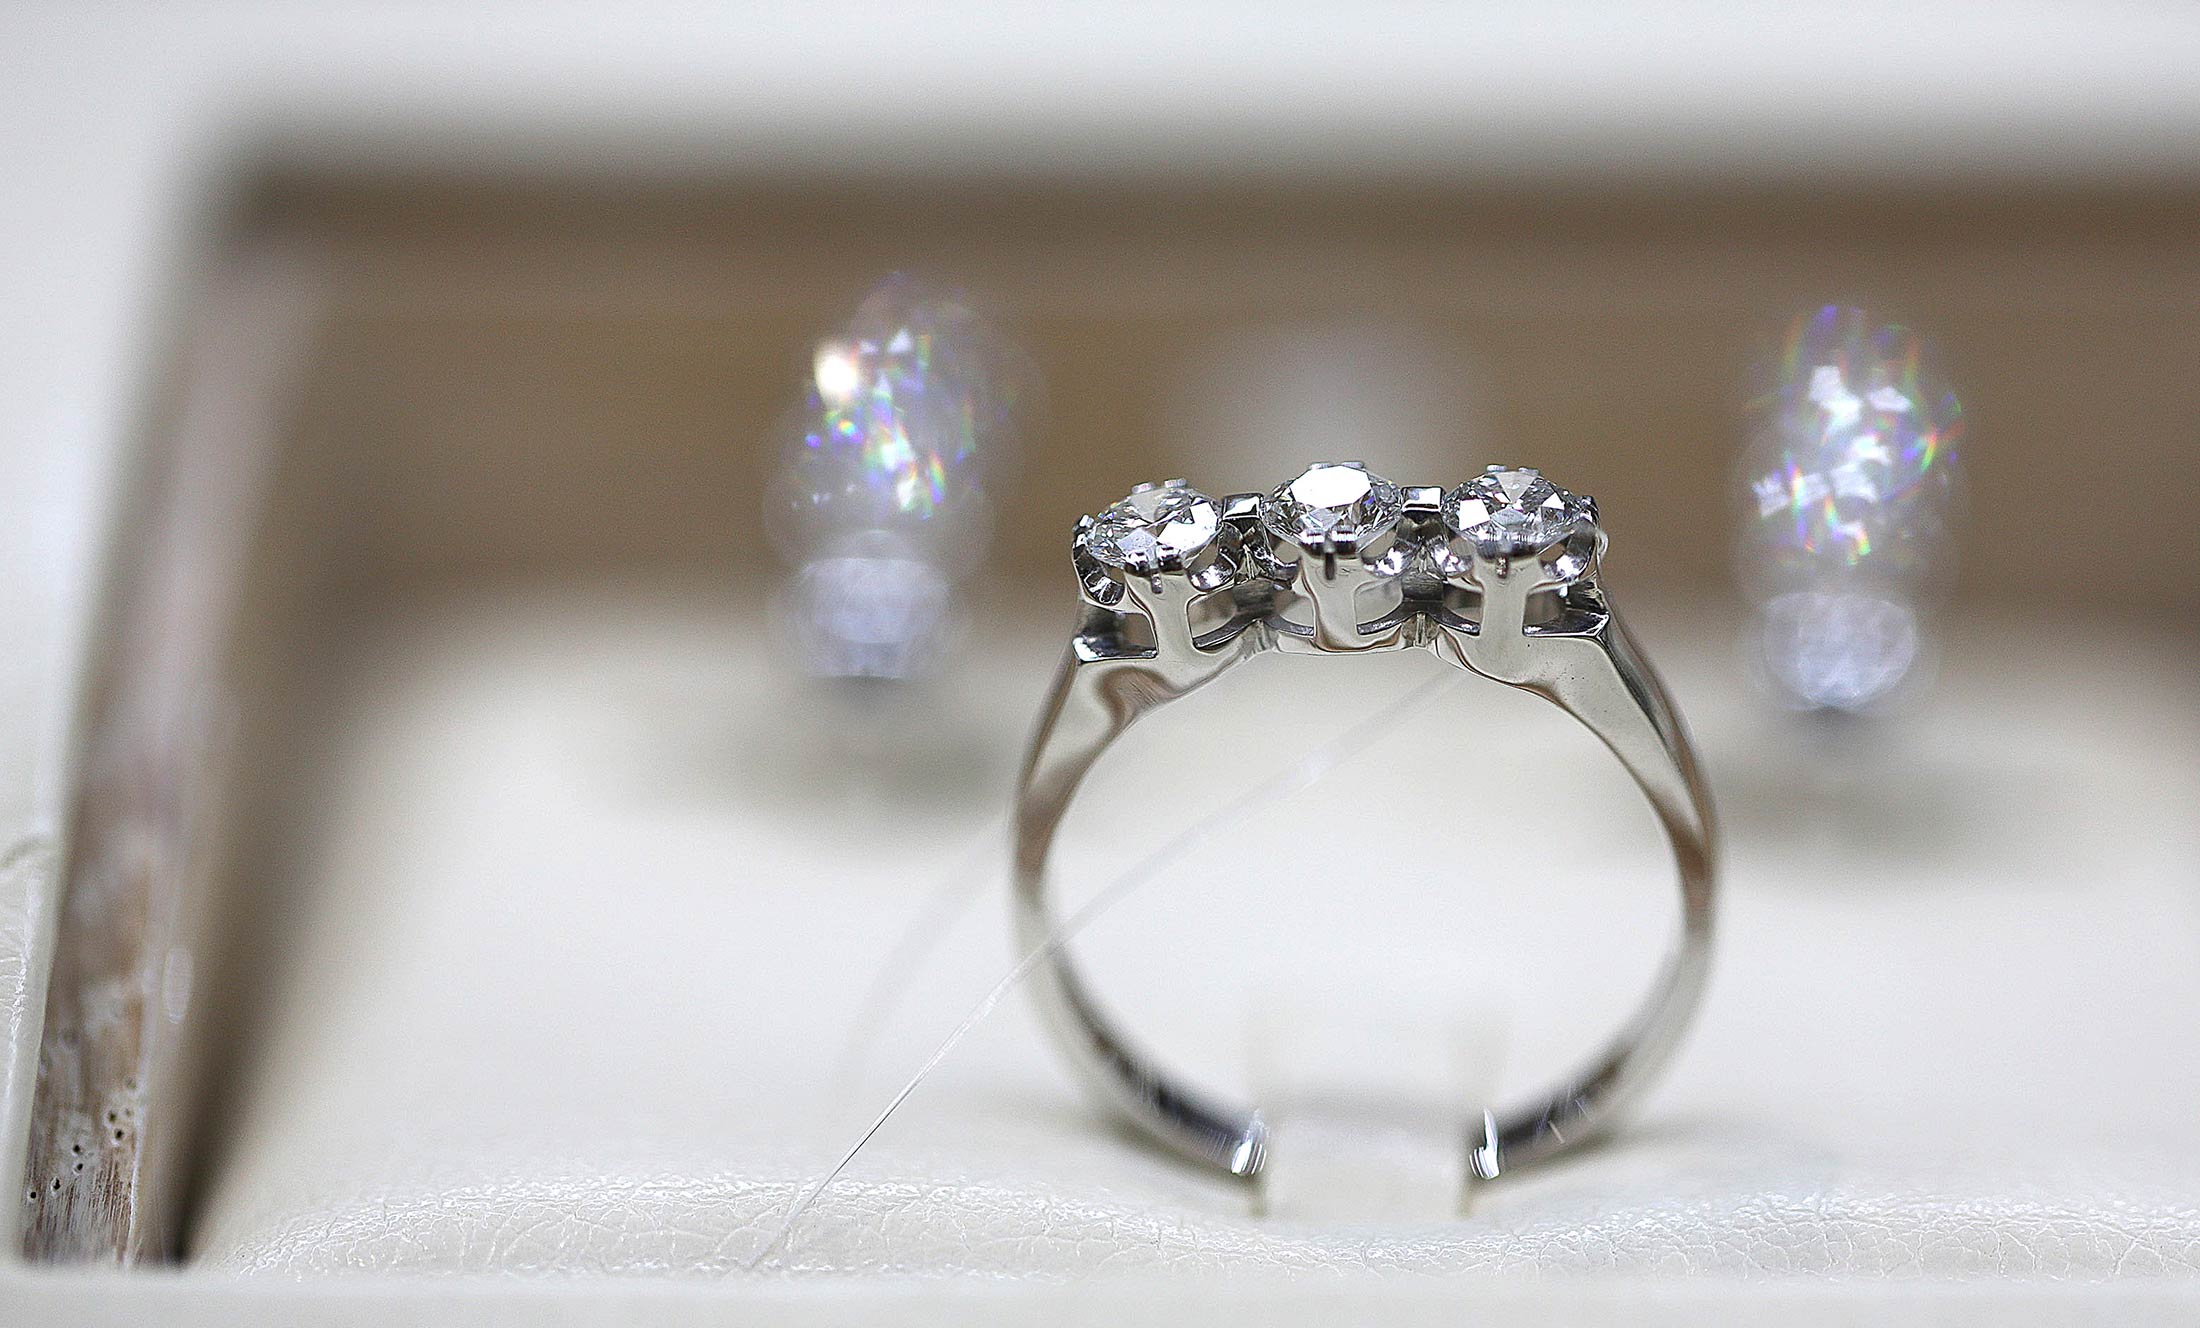 De Beers is selling diamonds for less and the industry isn't happy